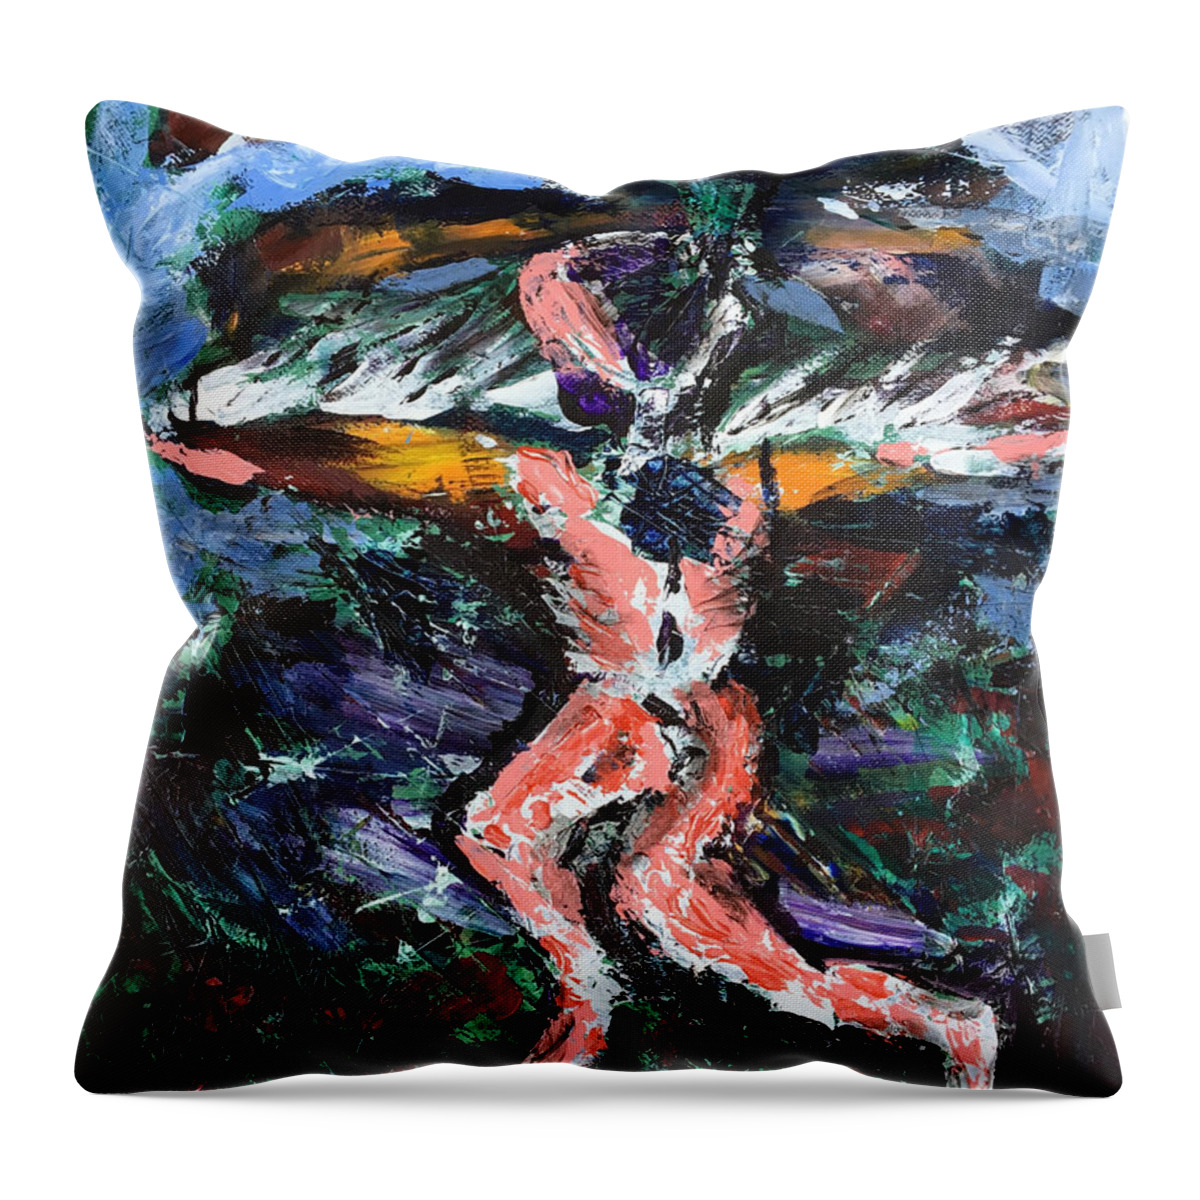 Icarus Throw Pillow featuring the painting Icarus by Uwe Hoche